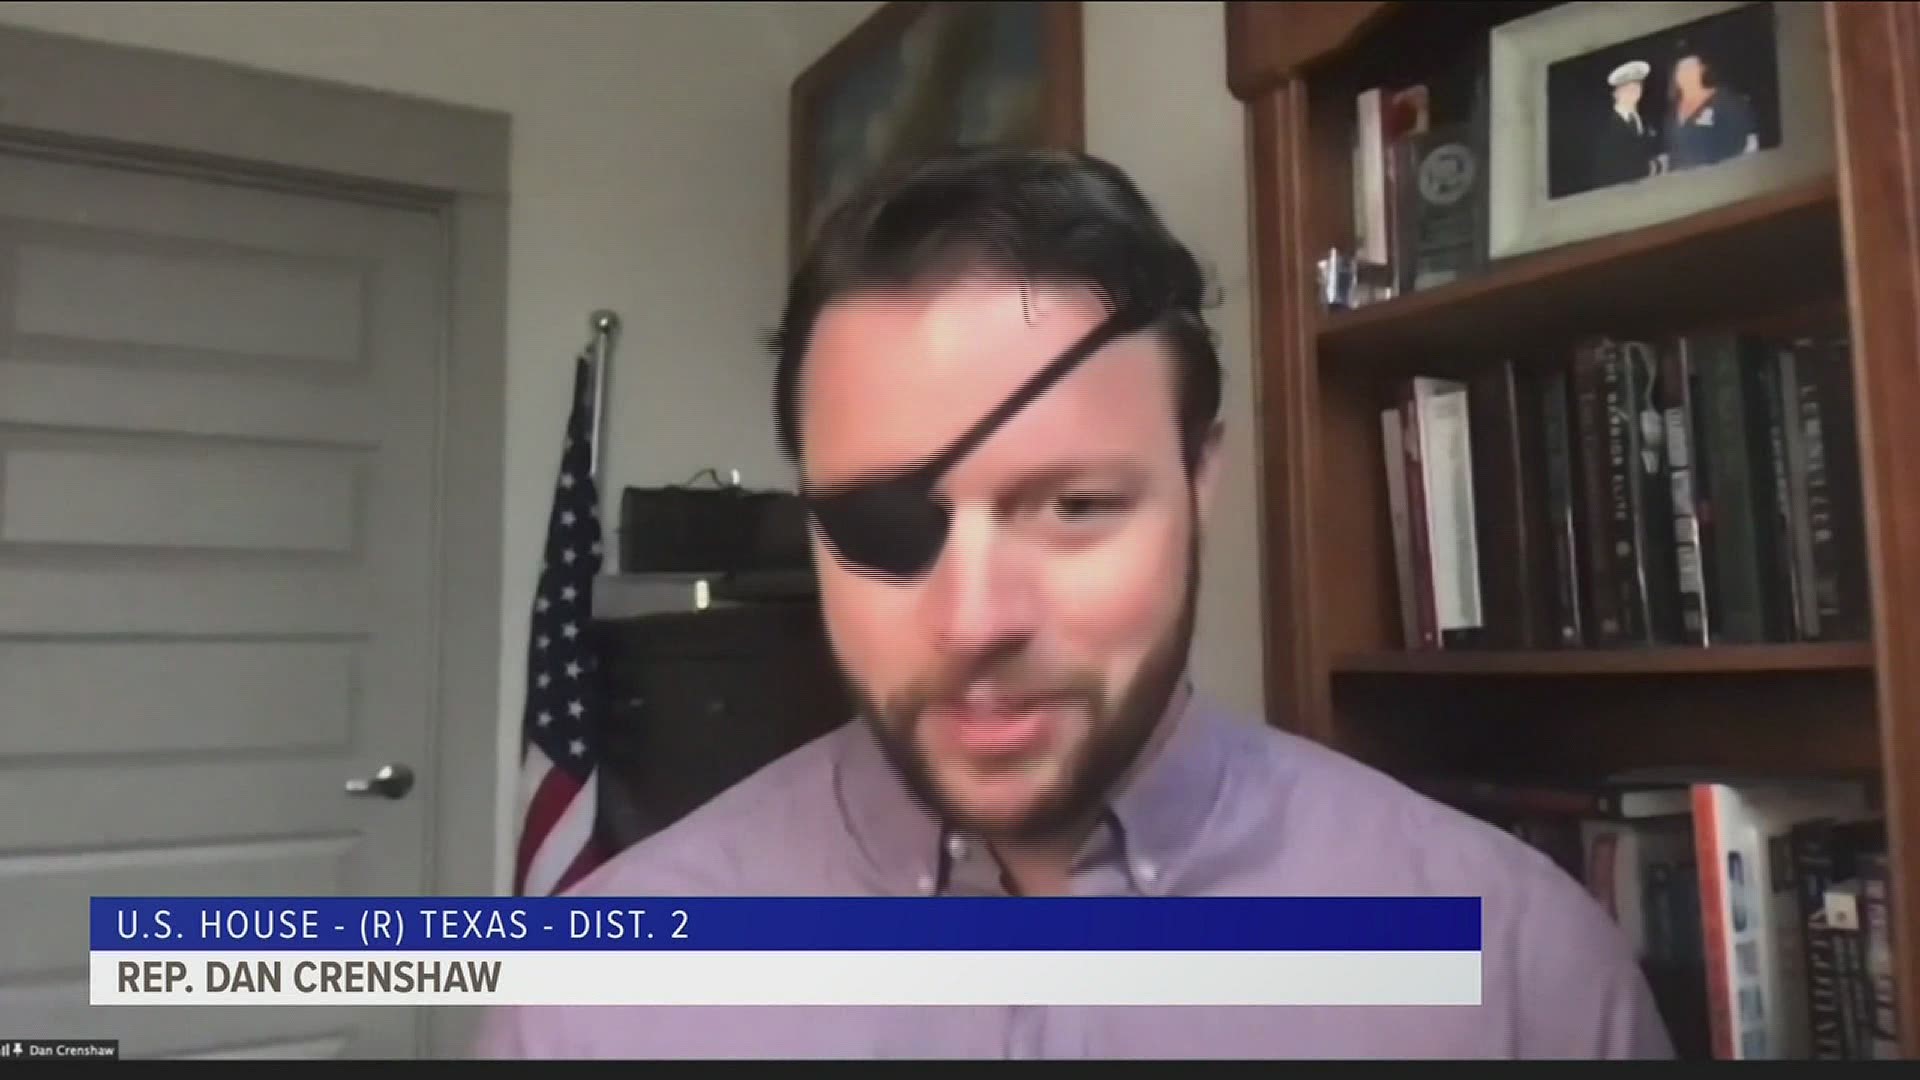 Rep. Dan Crenshaw is on the Energy & Commerce Committee, which he said has historically been bipartisan. He's skeptical of Biden's plans, but wants to work together.